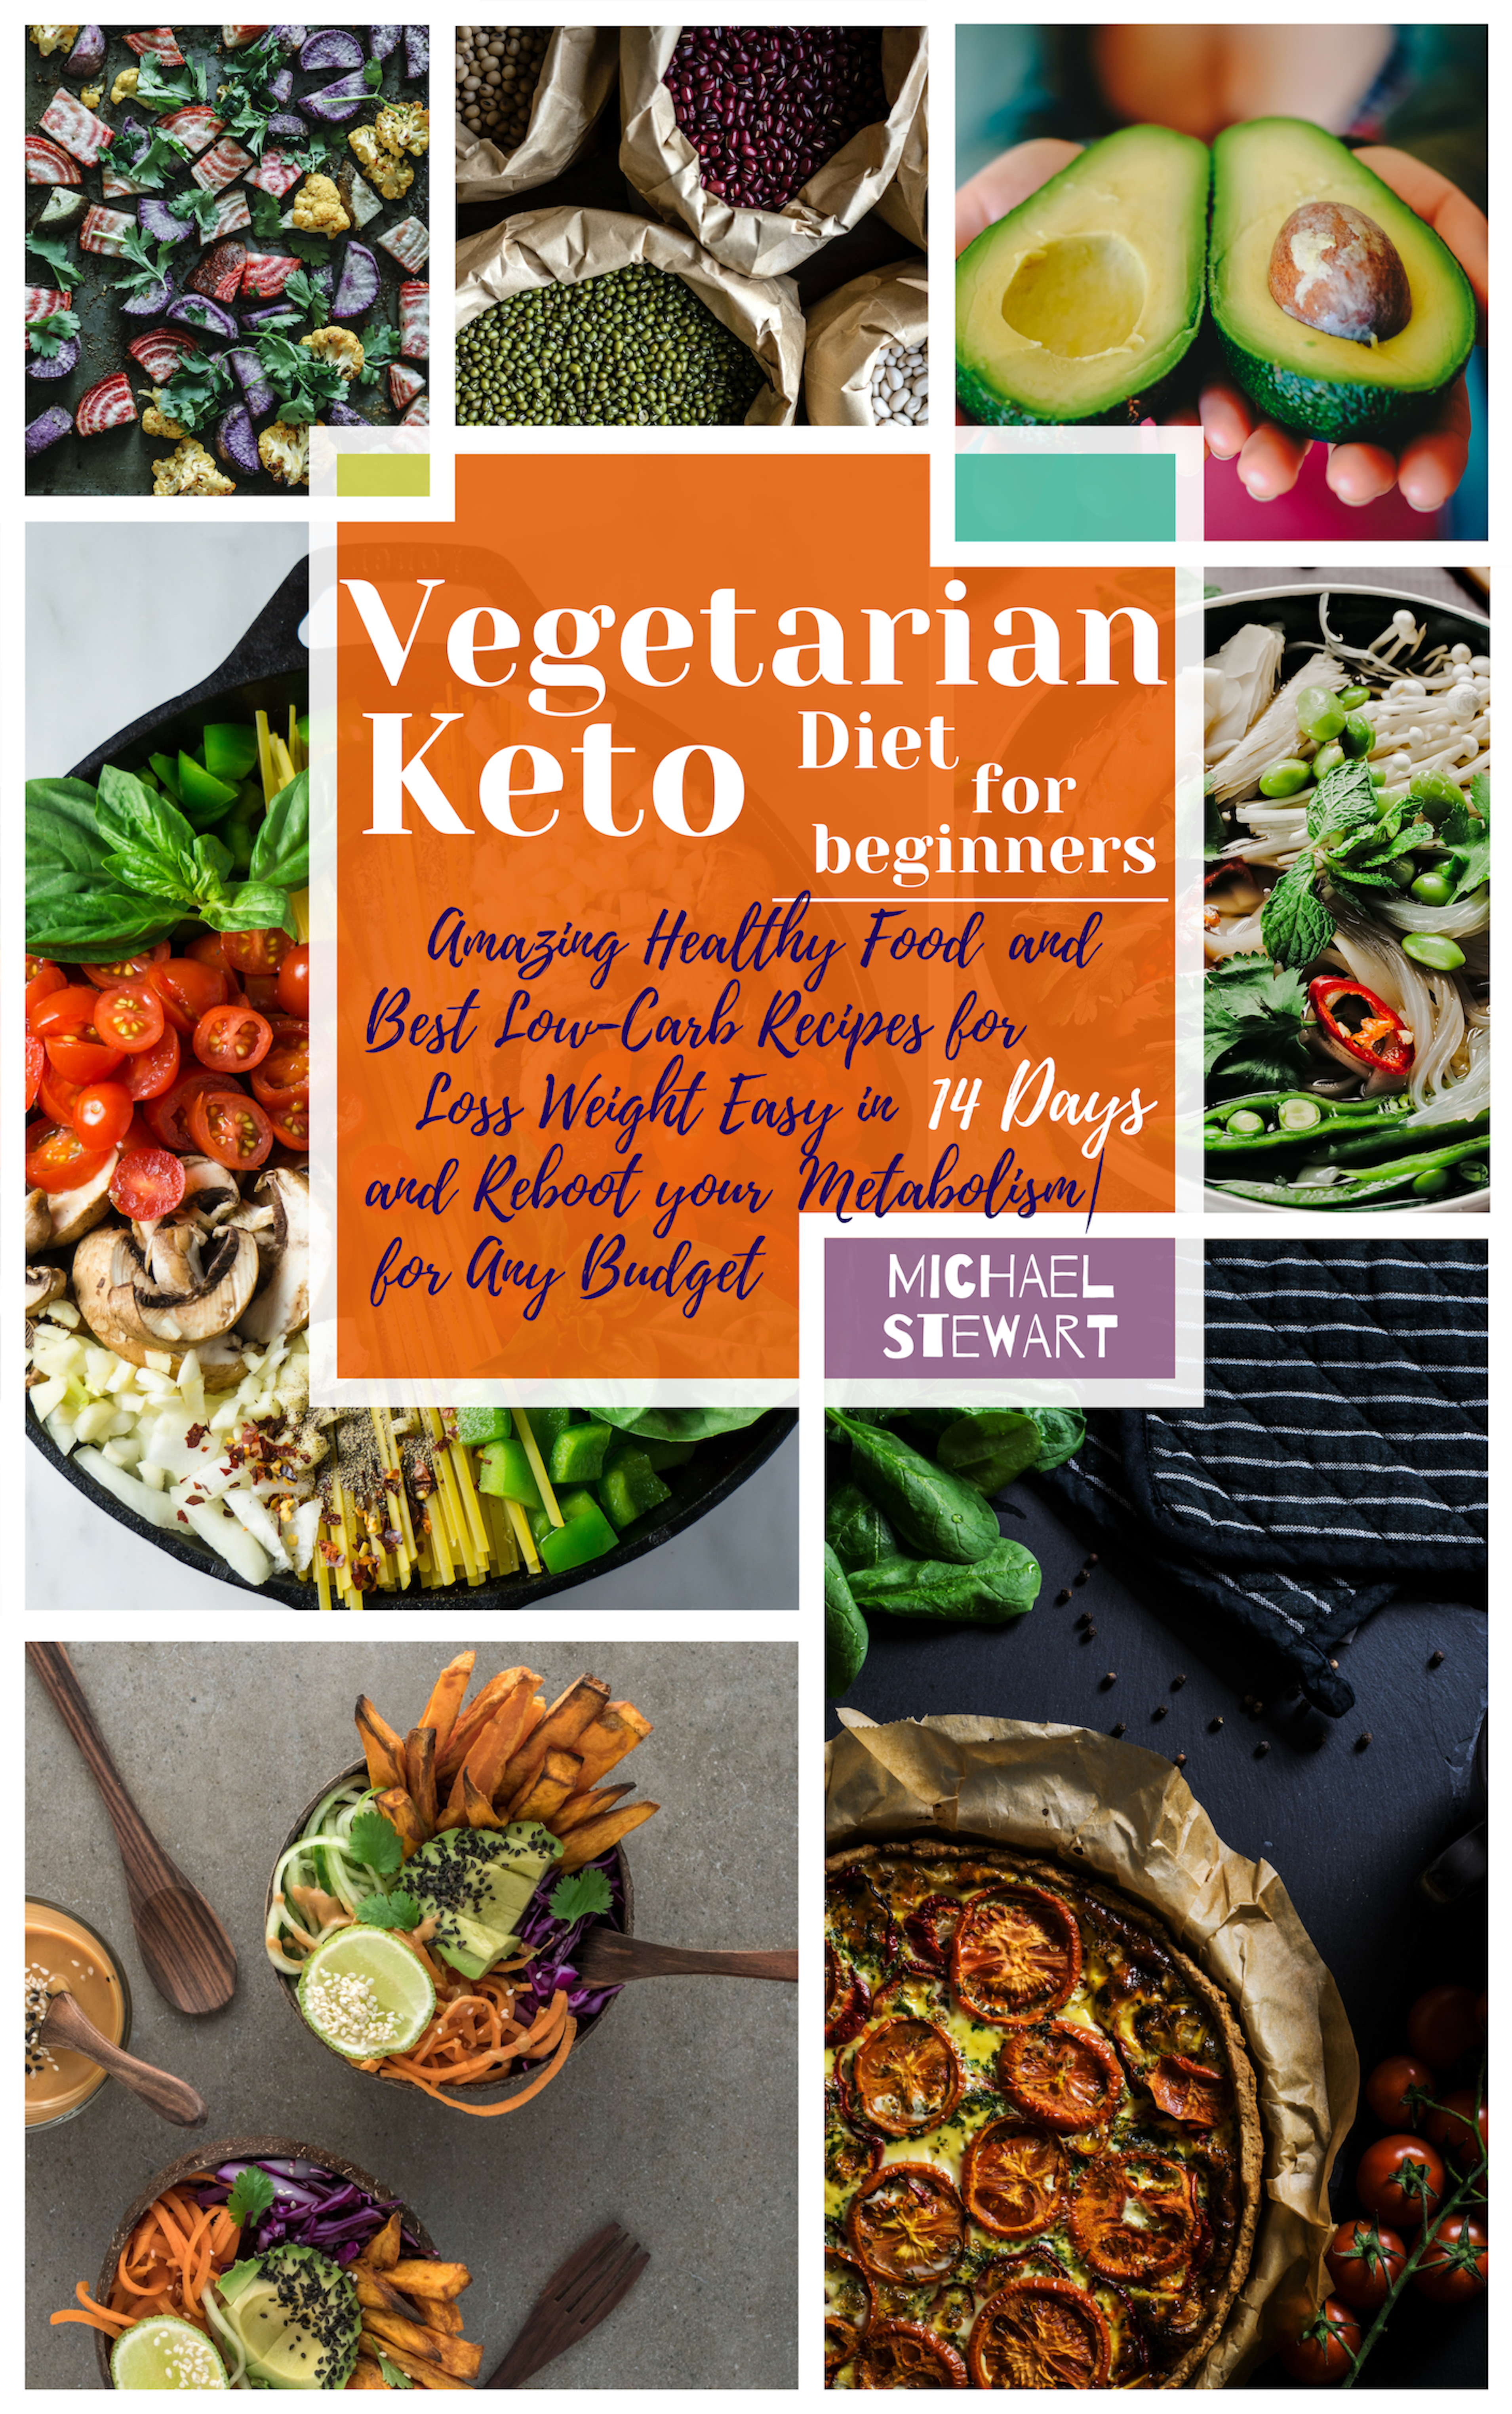 FREE: Vegetarian Keto Diet for Beginners: Amazing Healthy Food and Best Low-Carb Recipes for Loss Weight Easy in 14 Days and Reboot your Metabolism| for Any Budget  by michael